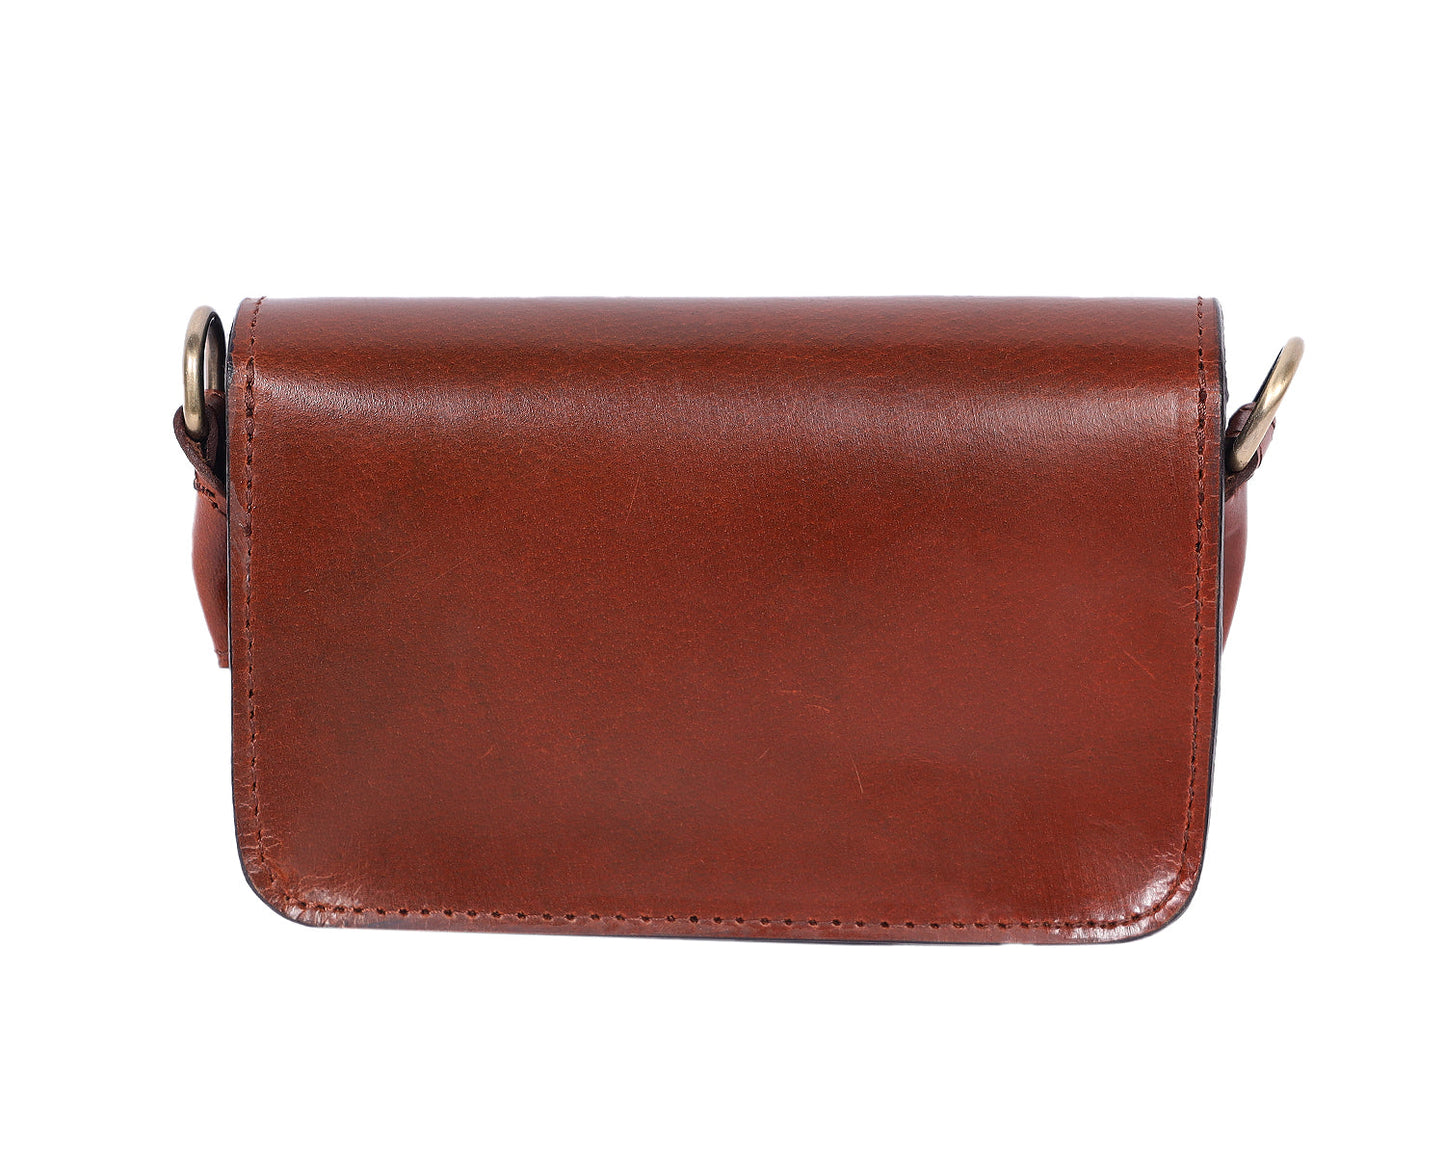 Elegance Redefined: Brown Leather Clutch - Your Timeless Fashion Accessory. - CELTICINDIA